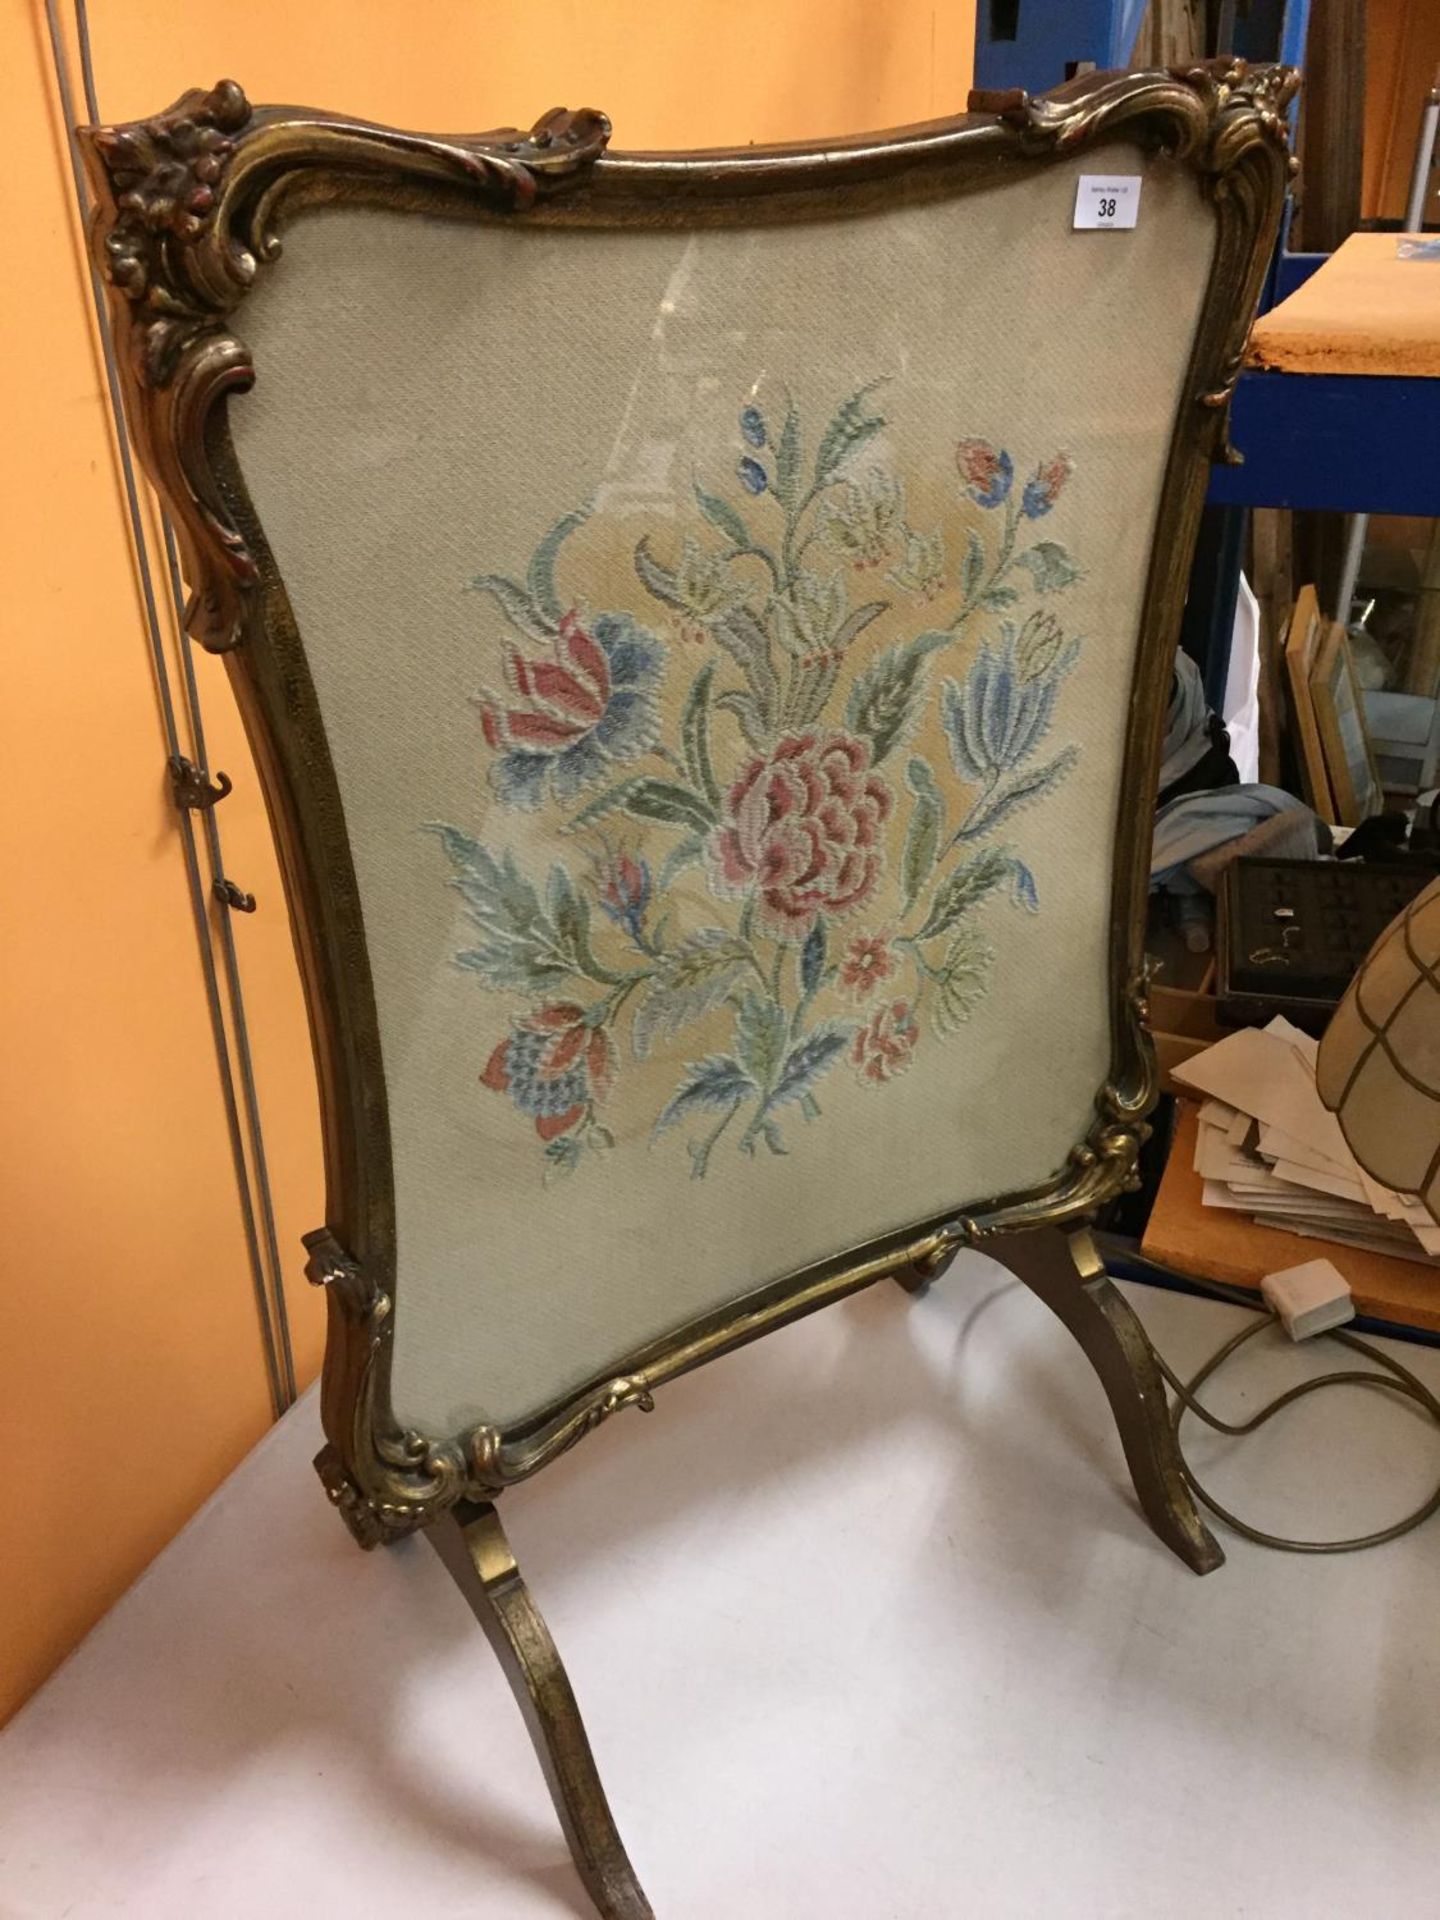 AN ORNATELY FRAMED CROSS STITCHED FIRE SCREEN WITH A FLOWER DESIGN - Image 3 of 4